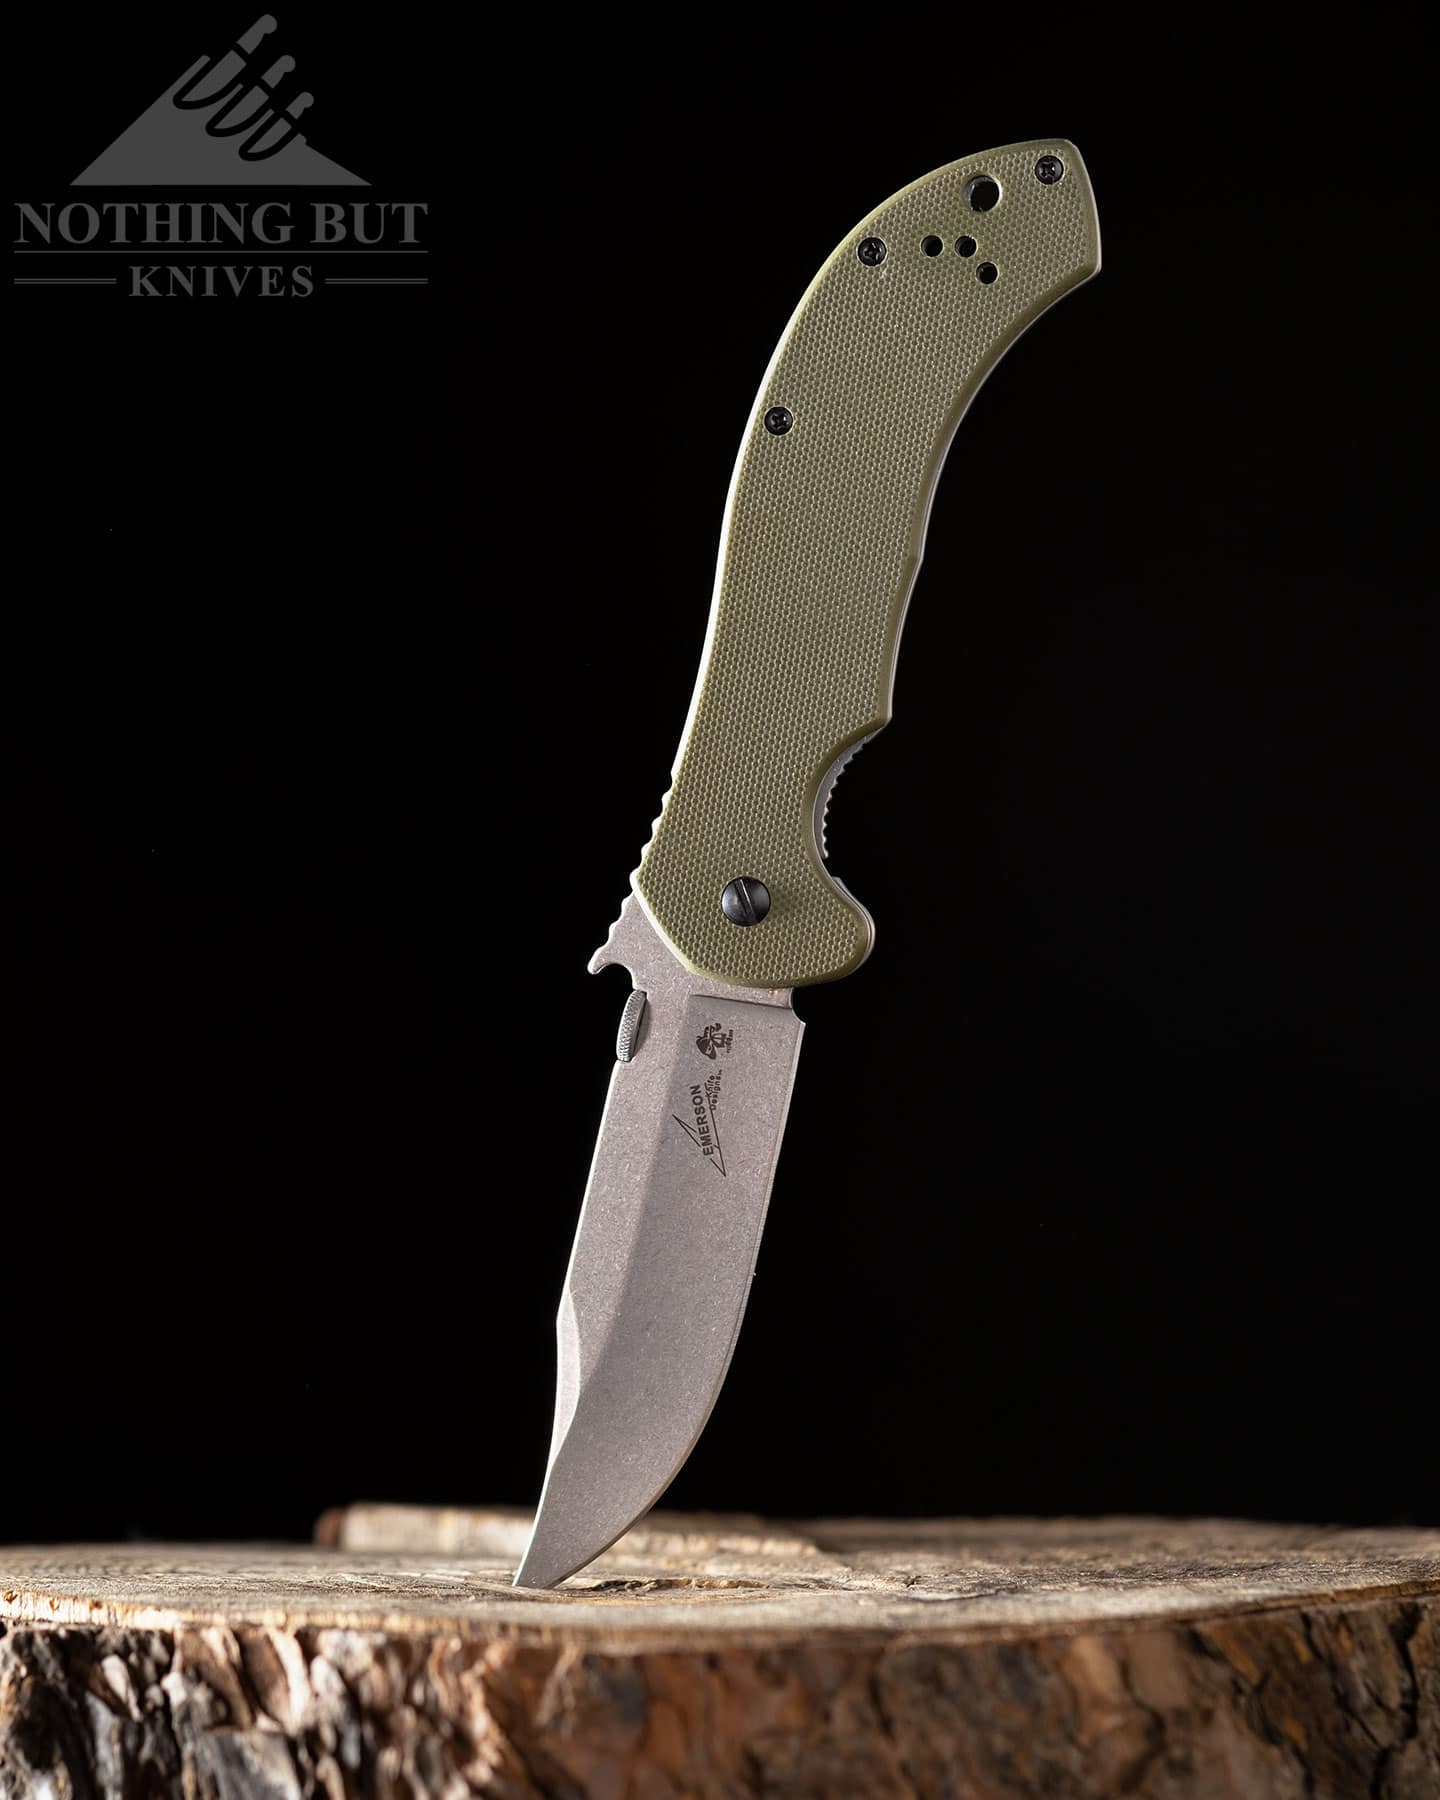 The Kershaw Emerson CQC line of pocket knives is one of the best series of tactical pocket knives we have tested. 